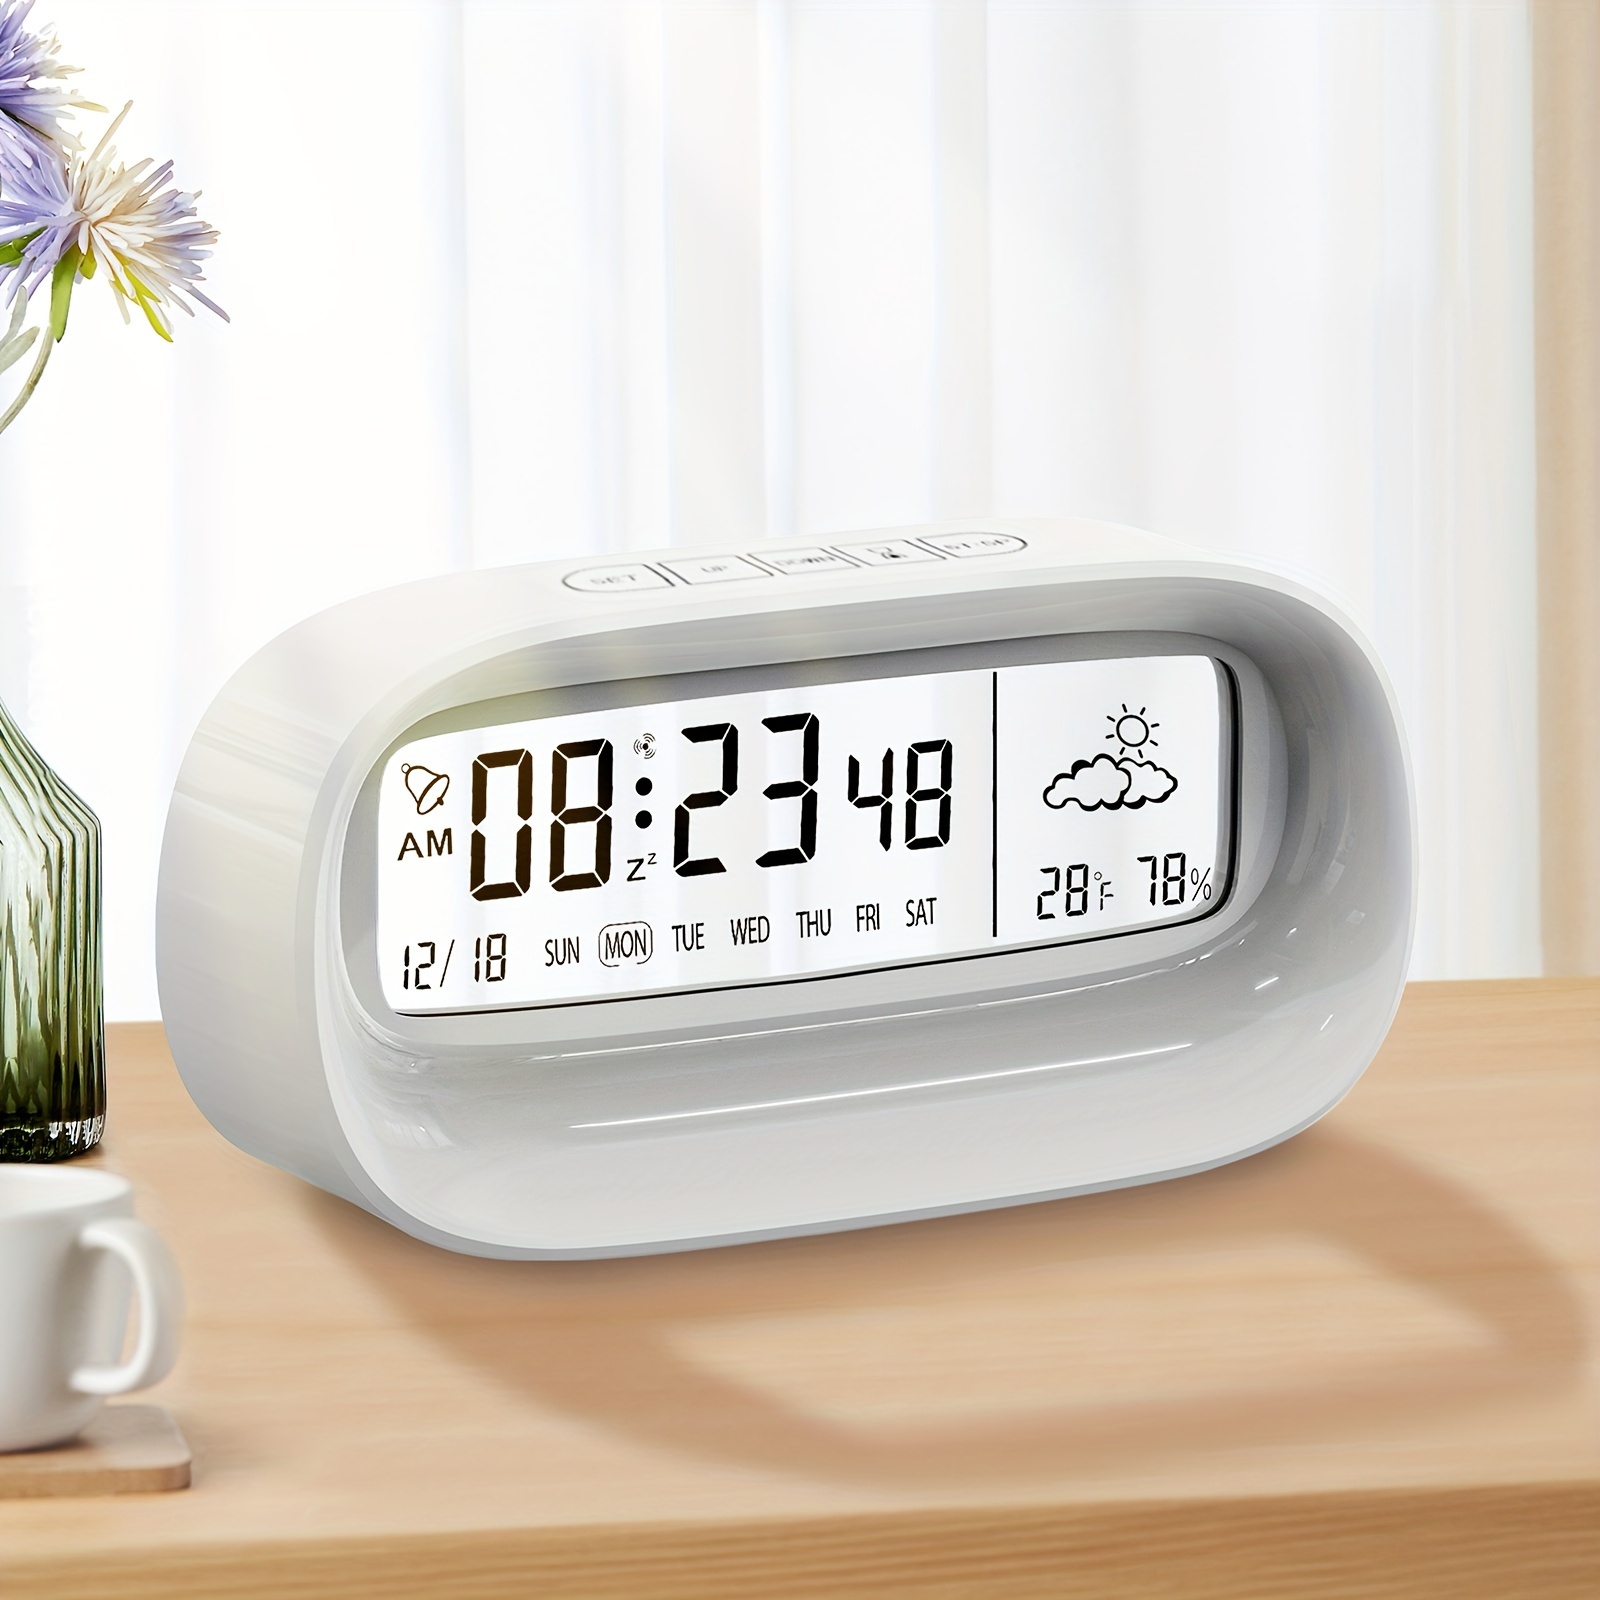 

Digital Alarm Clocks For Bedrooms Battery Powered Desk Clock With Seconds, Date, Week, 12/24h, Temp, Hum, Snooze For Office, Living Room (transparent Modern Design White)